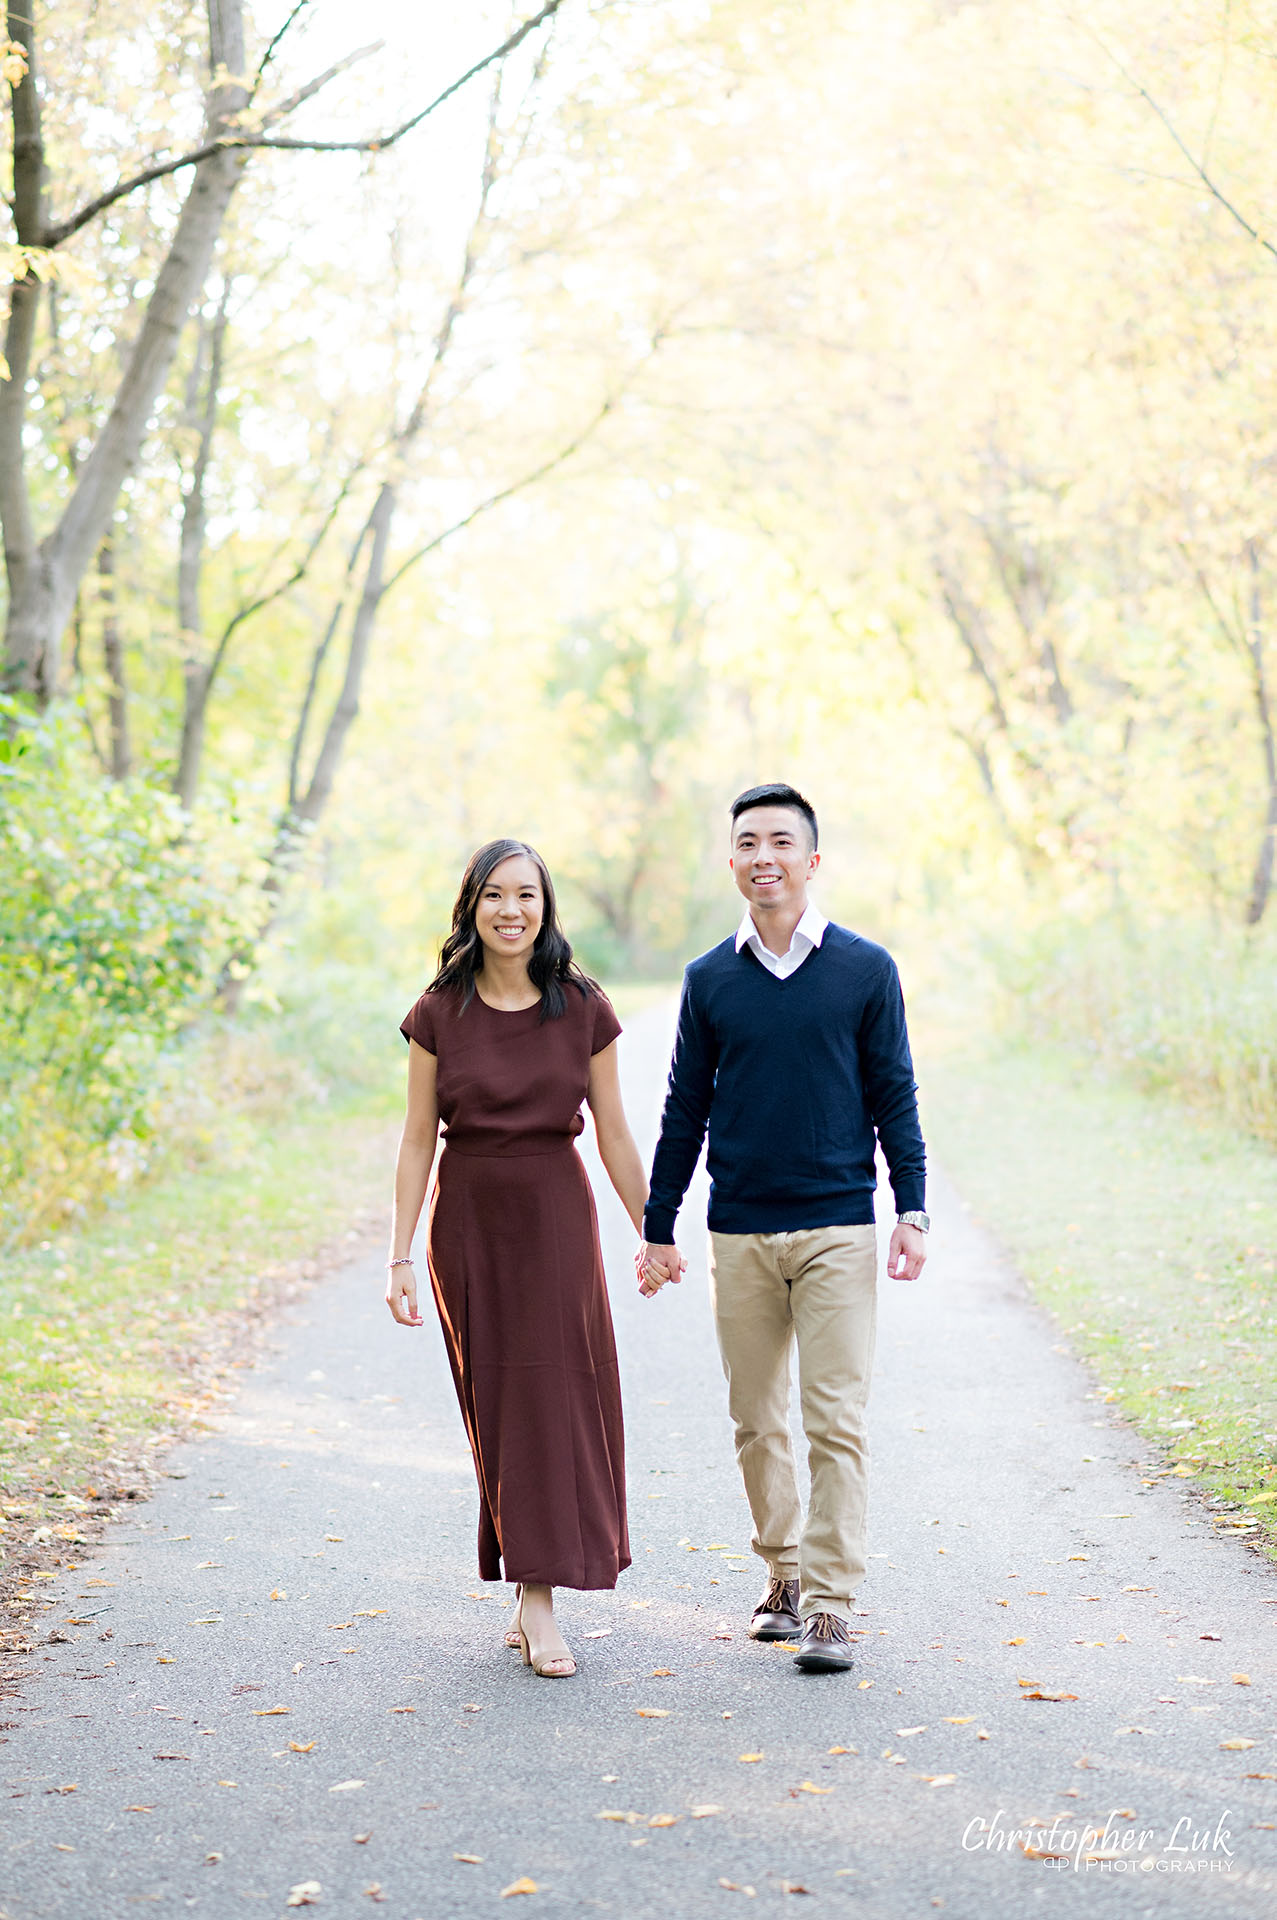 Christopher Luk Toronto Wedding Engagement Session Photographer Autumn Fall Leaves Natural Candid Photojournalistic Bride Groom Holding Hands Walking Together Pathway Hiking Trail